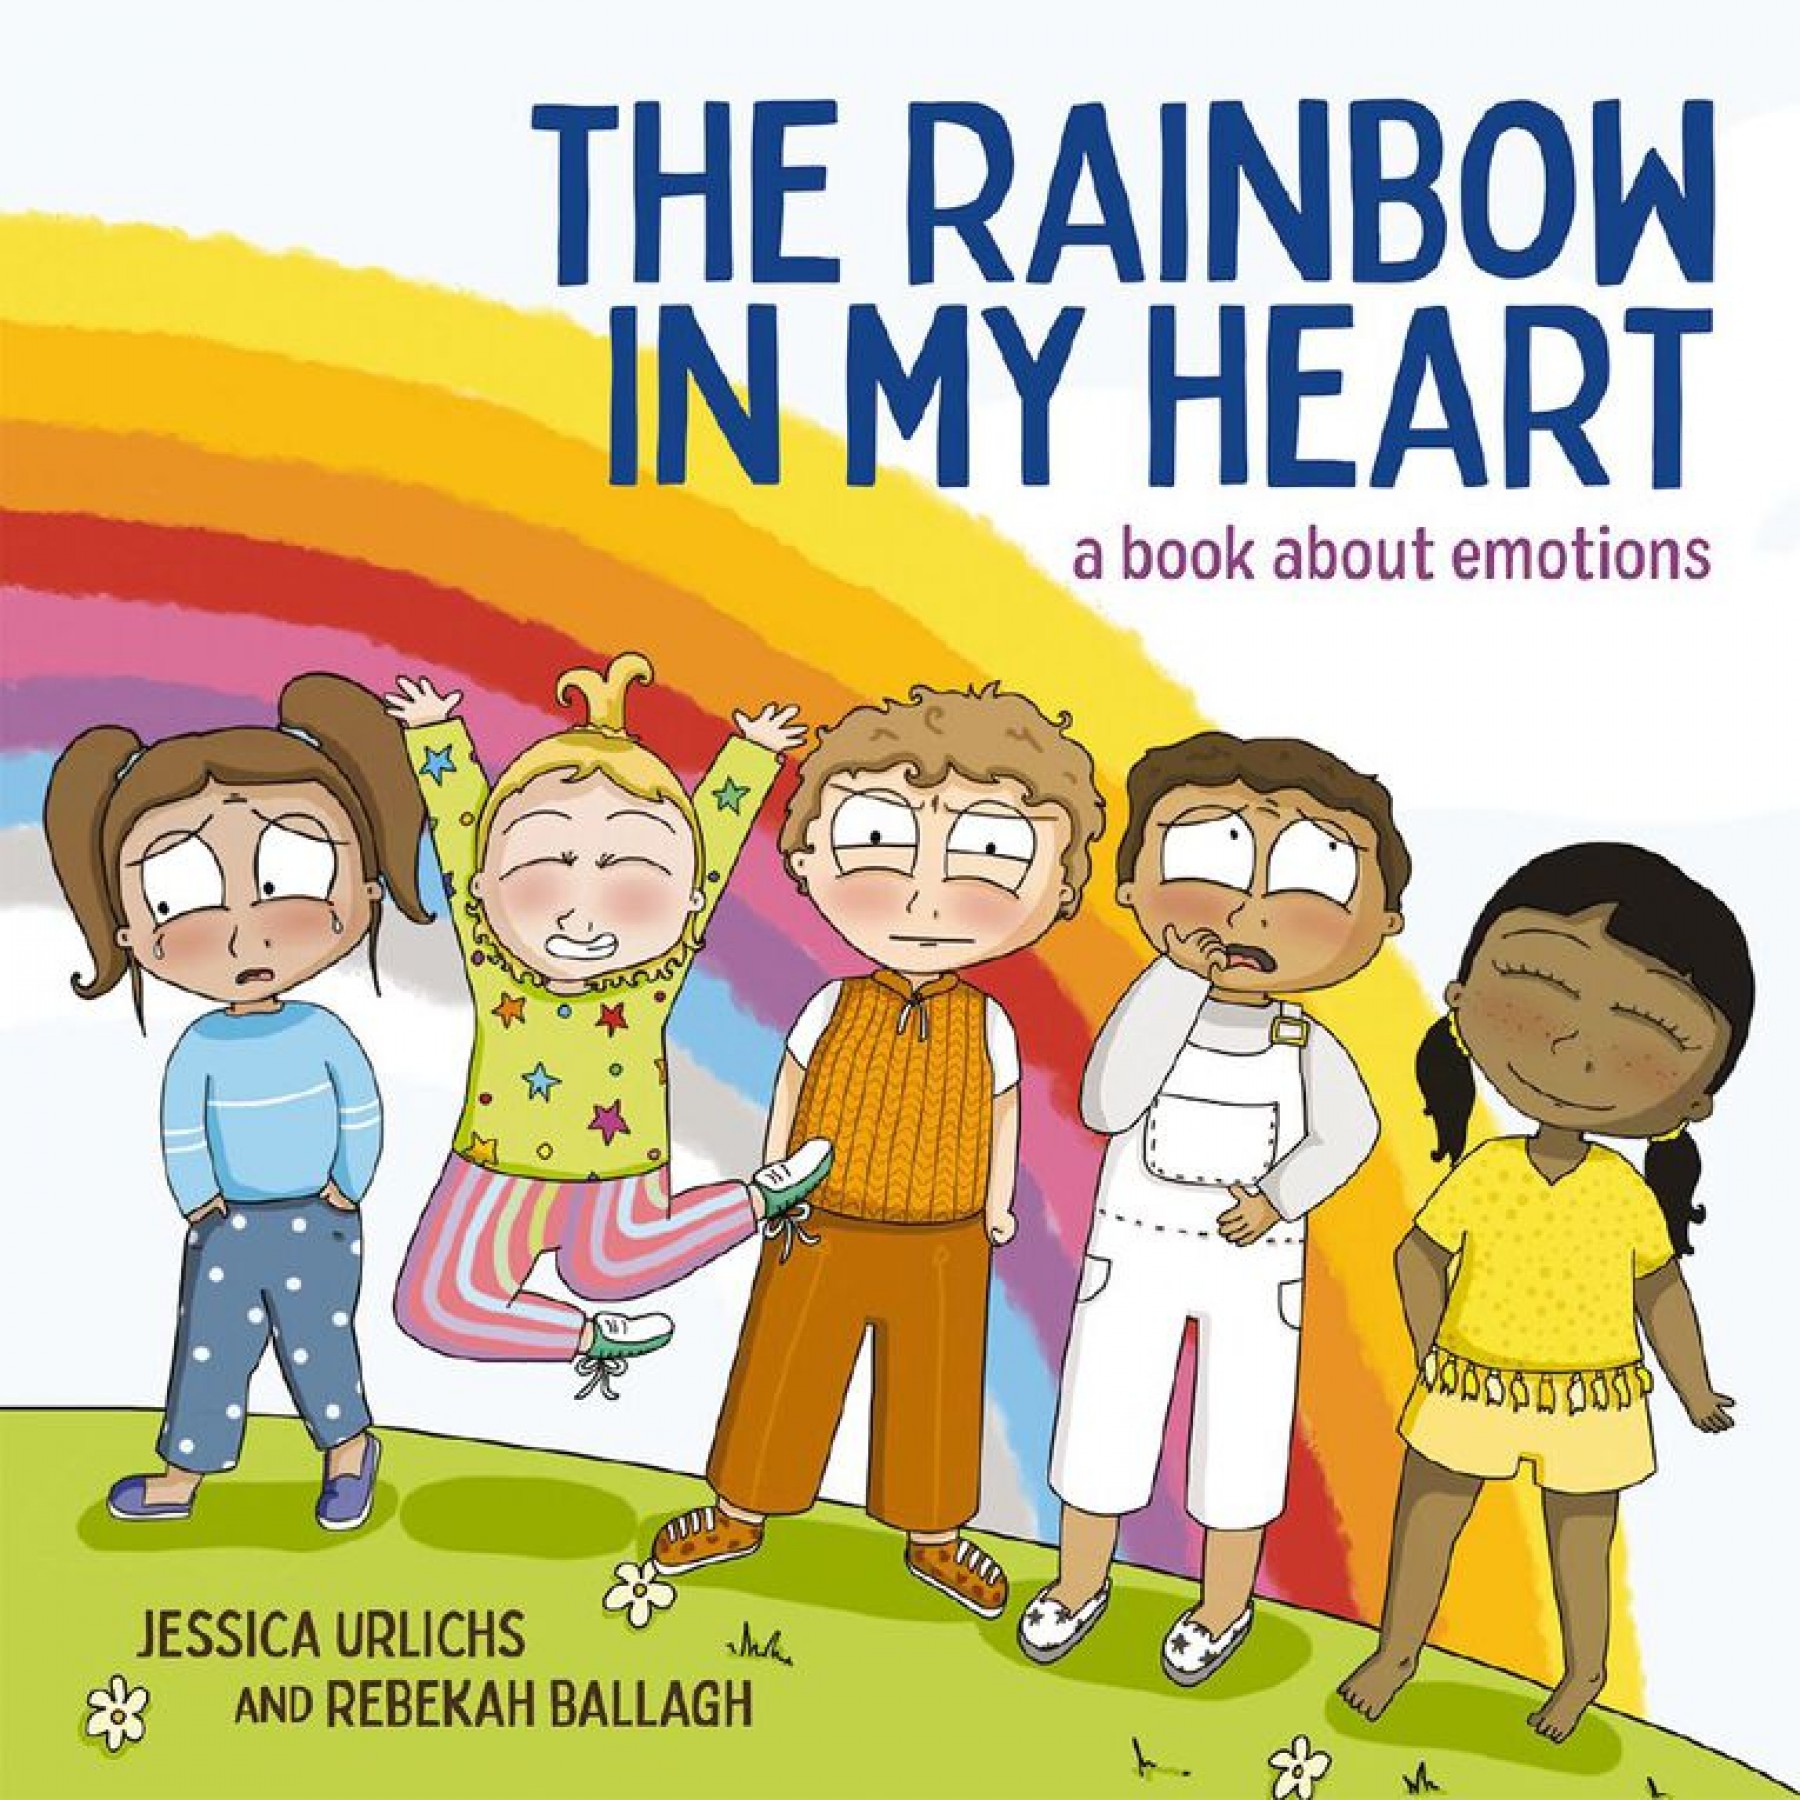 The rainbow in my heart: A book about emotions